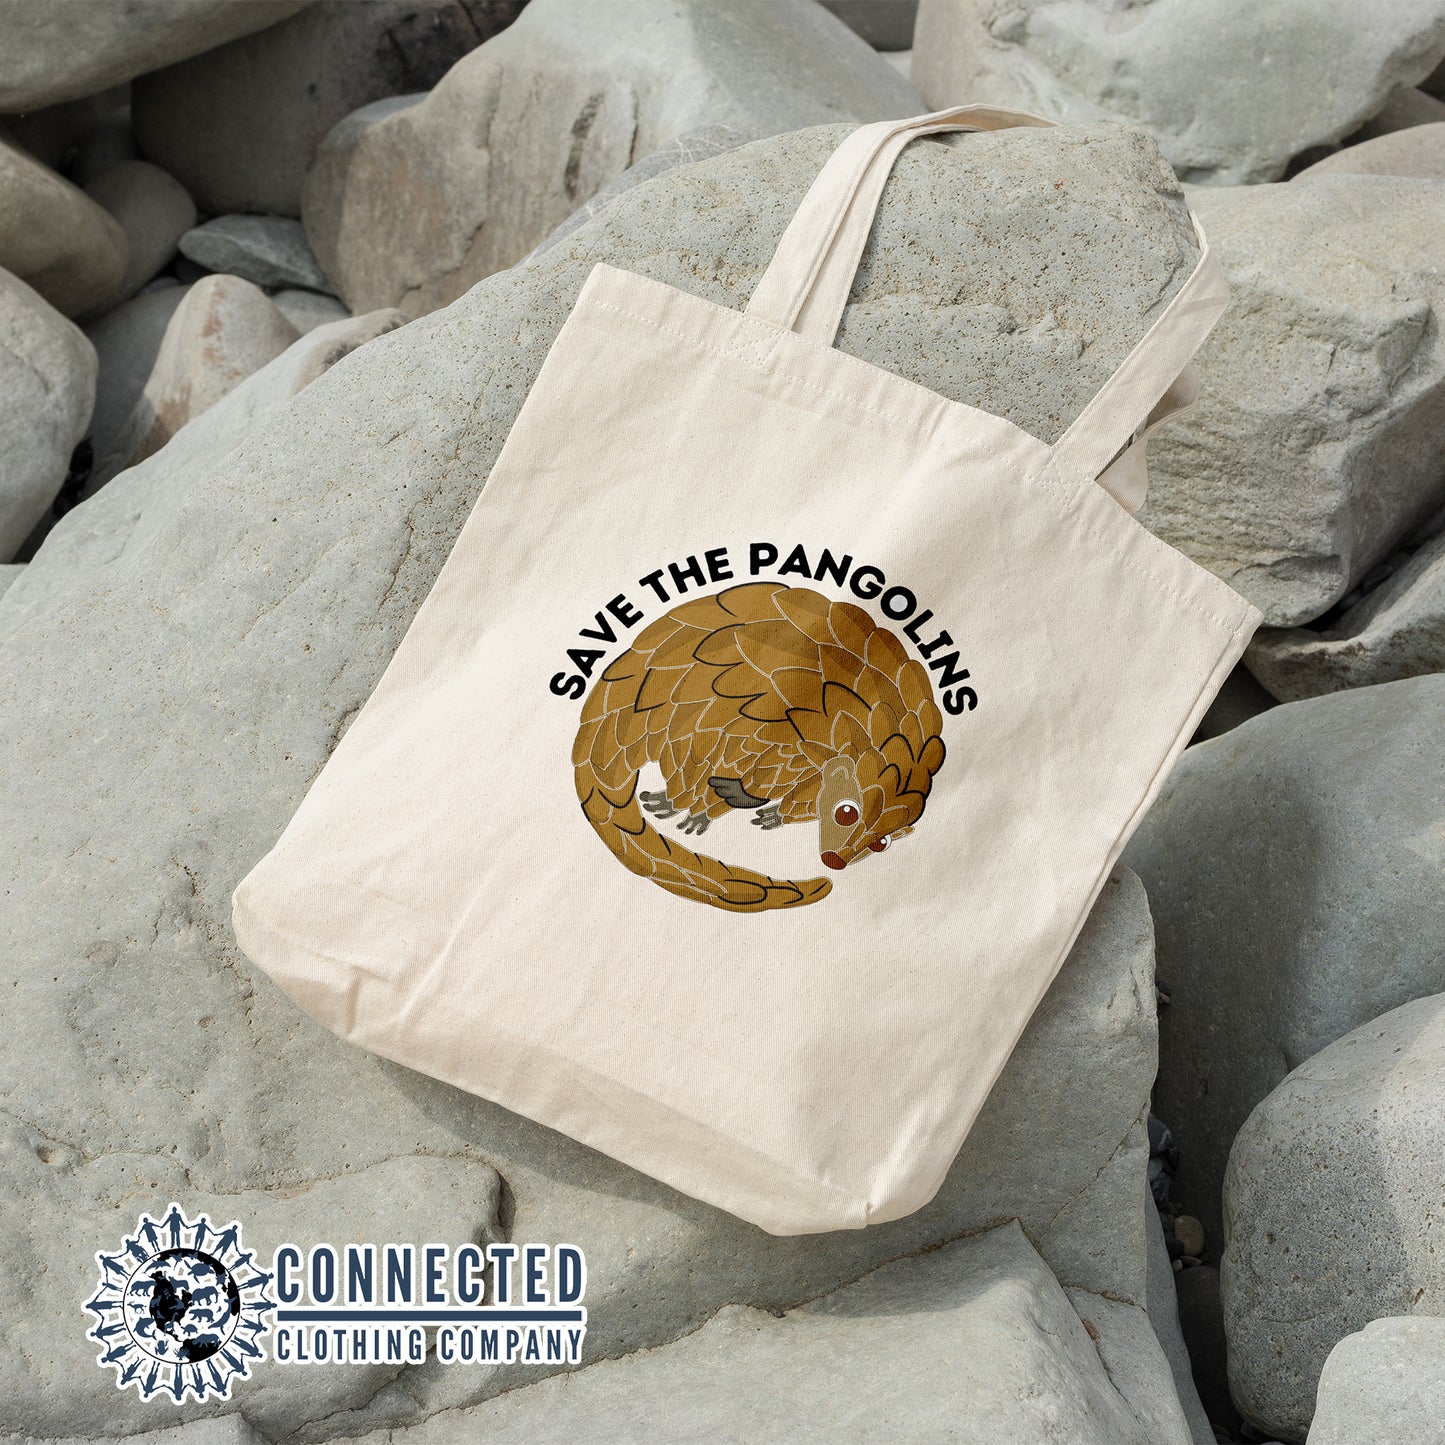 Save The Pangolins Tote Bag - sweetsherriloudesigns- 10% of proceeds donated to wildlife conservation